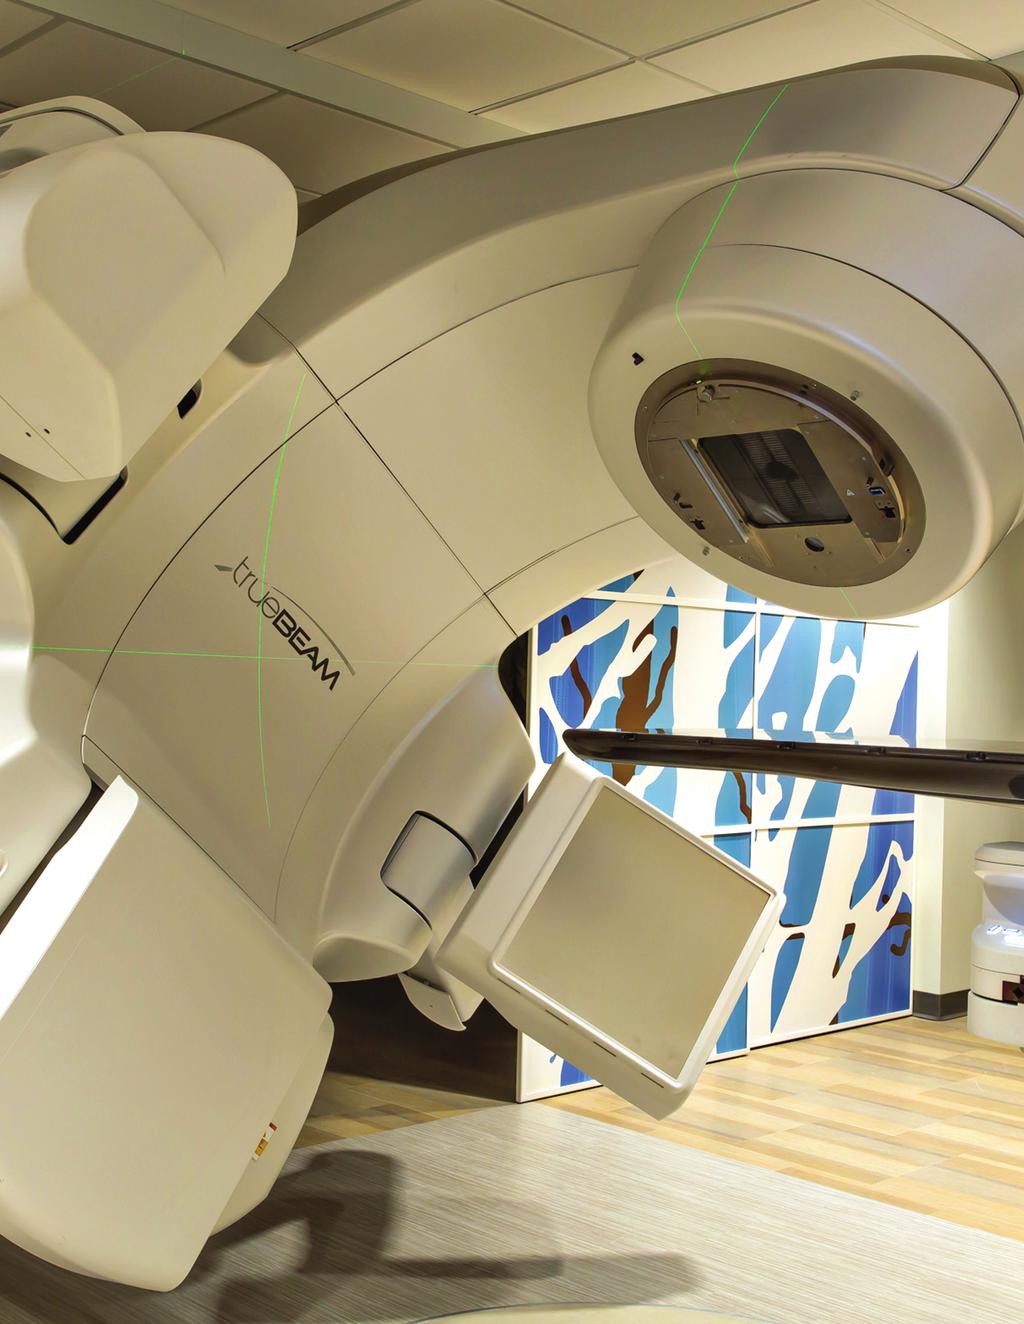 Varian TrueBeam Linear Accelerator at Maryview Medical Center Department